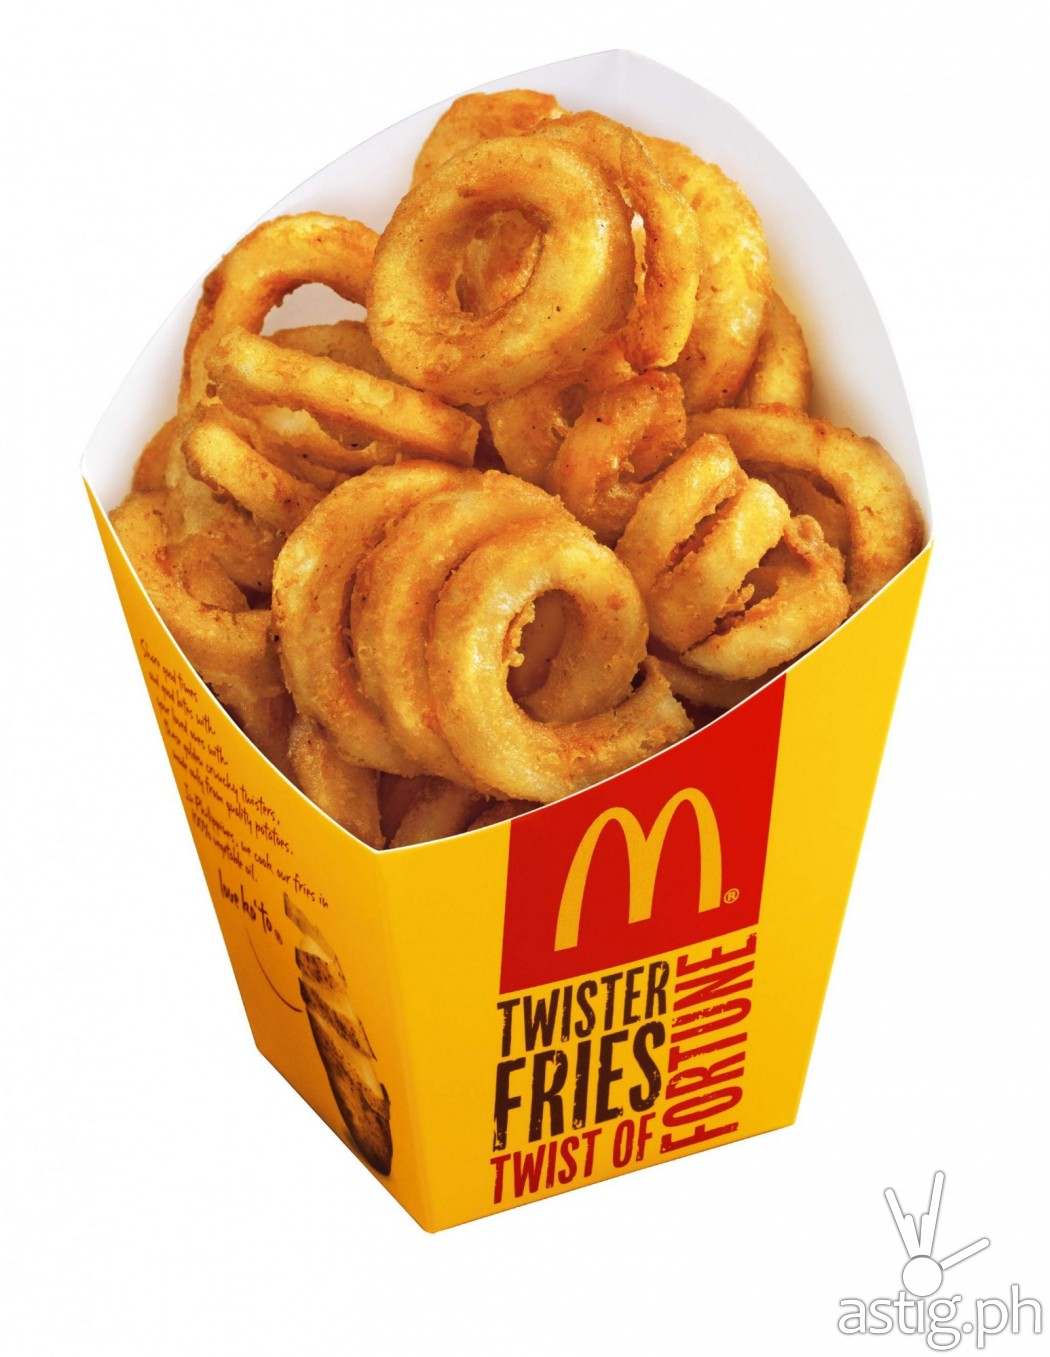 Twister Fries from McDonald’s Nurtrition & Price